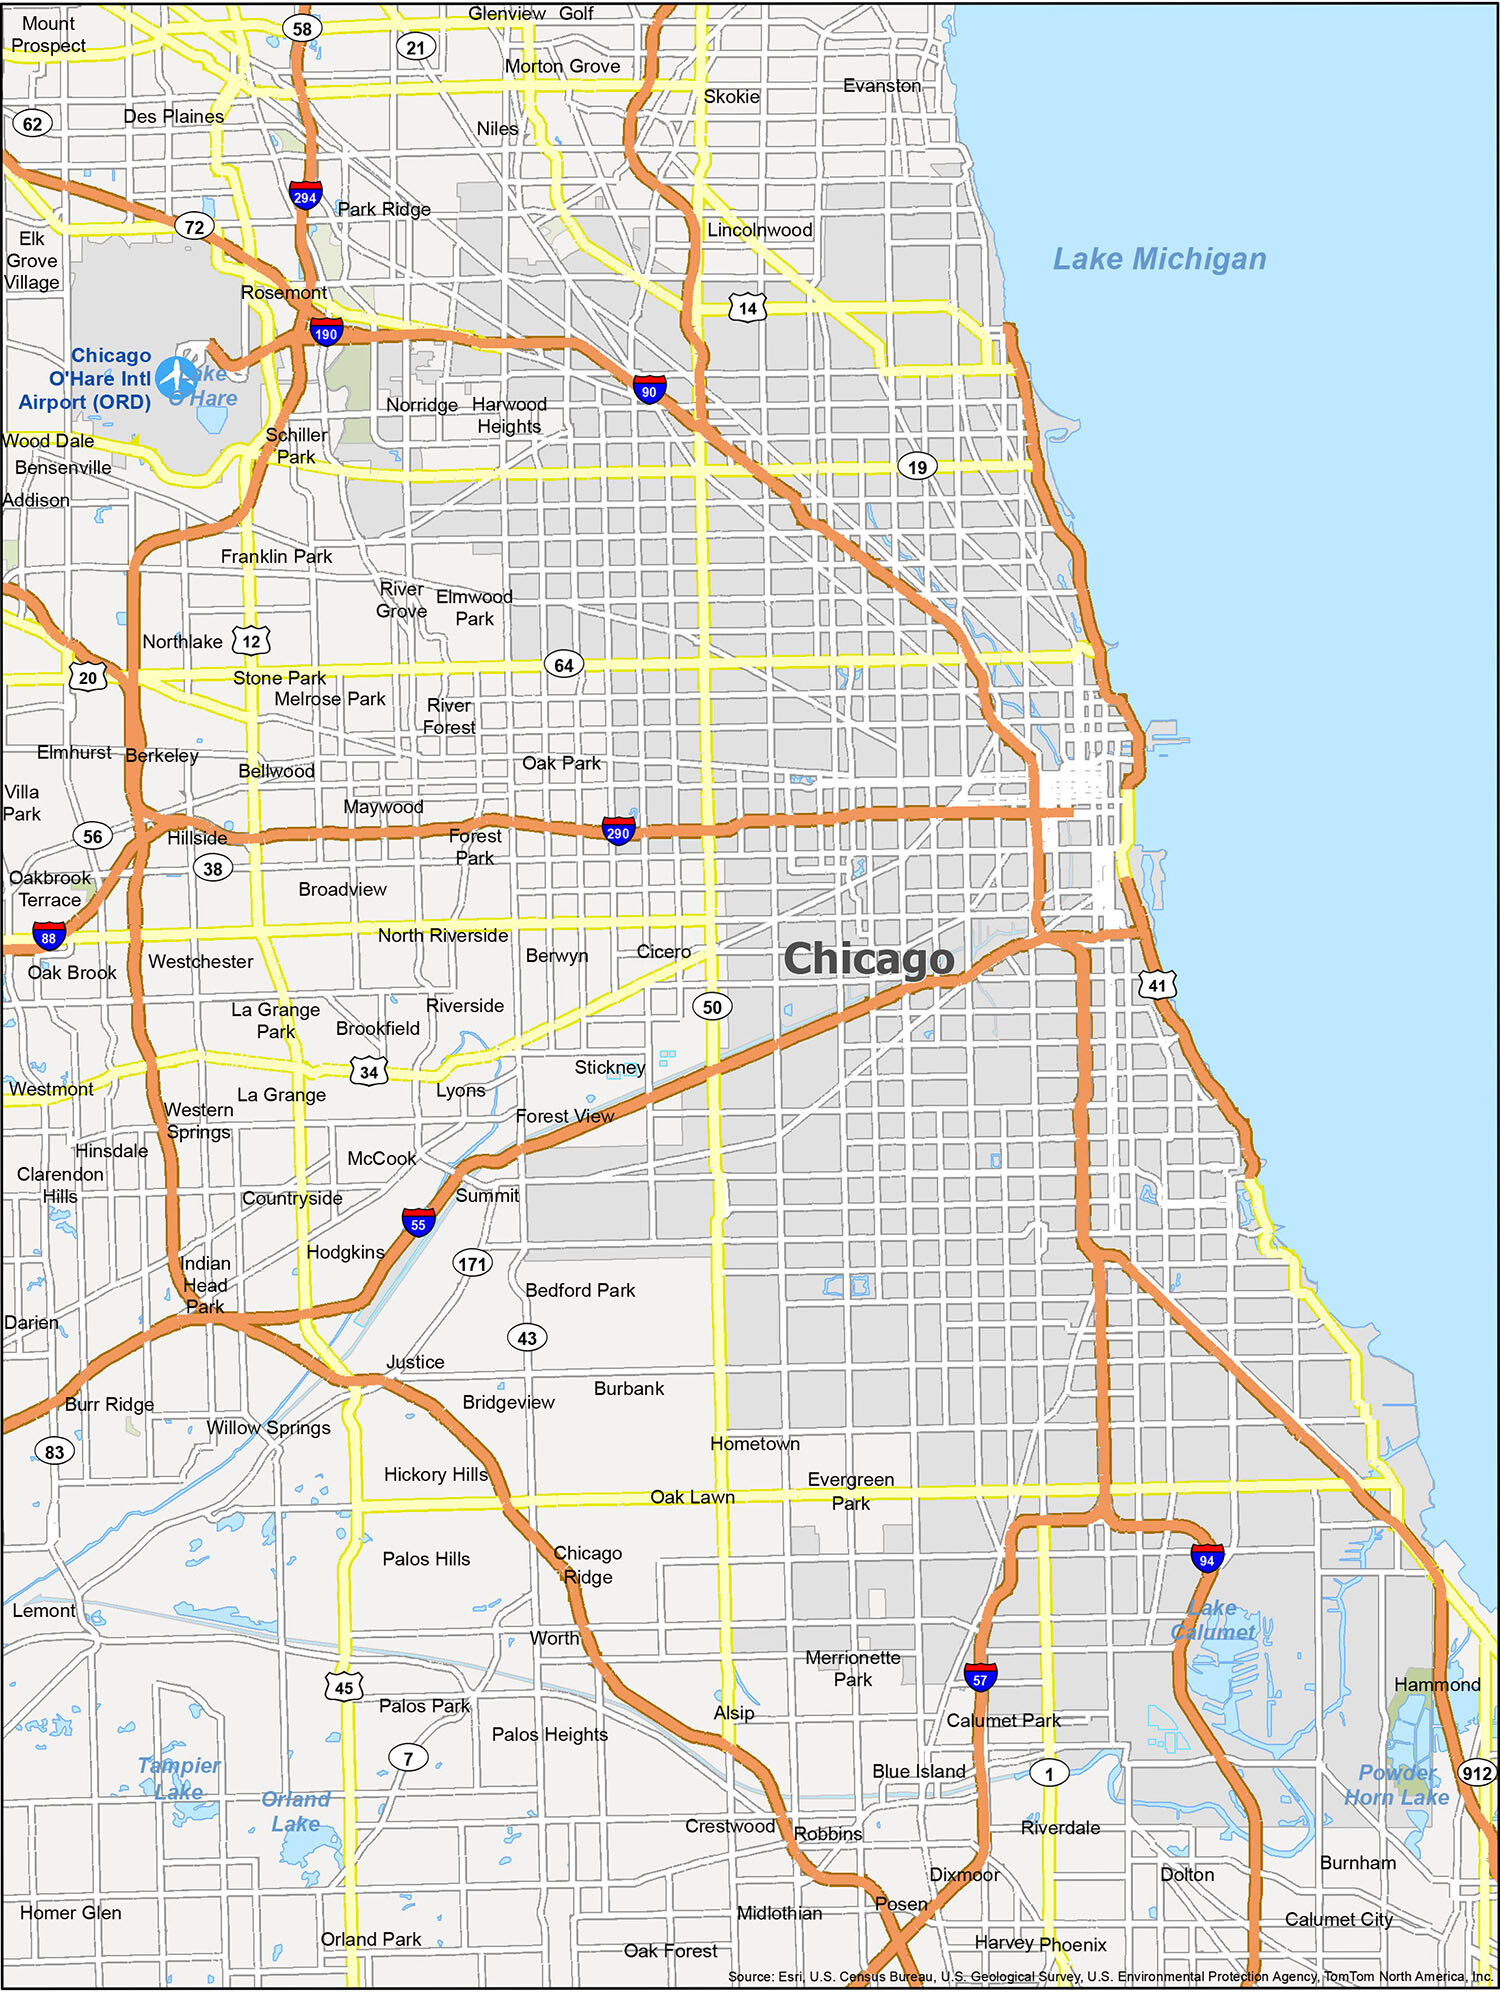 Greater Chicago Area Map